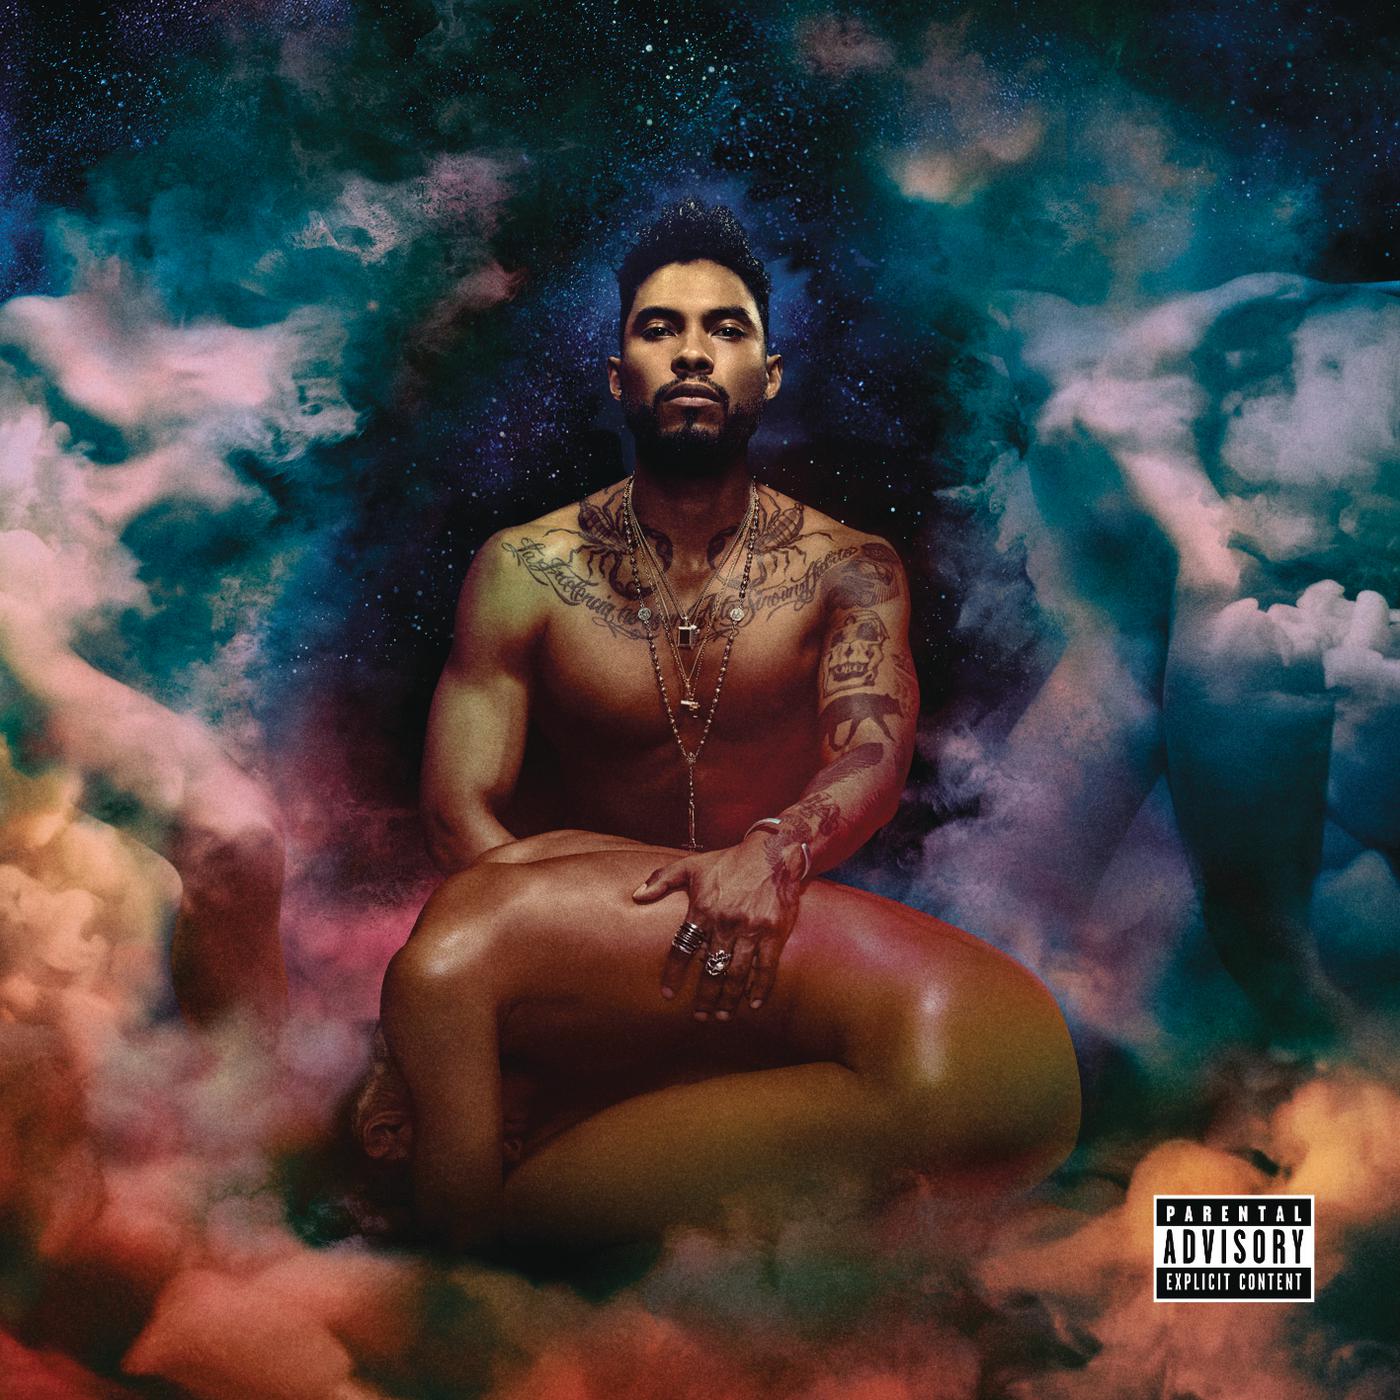 Miguel - a beautiful exit